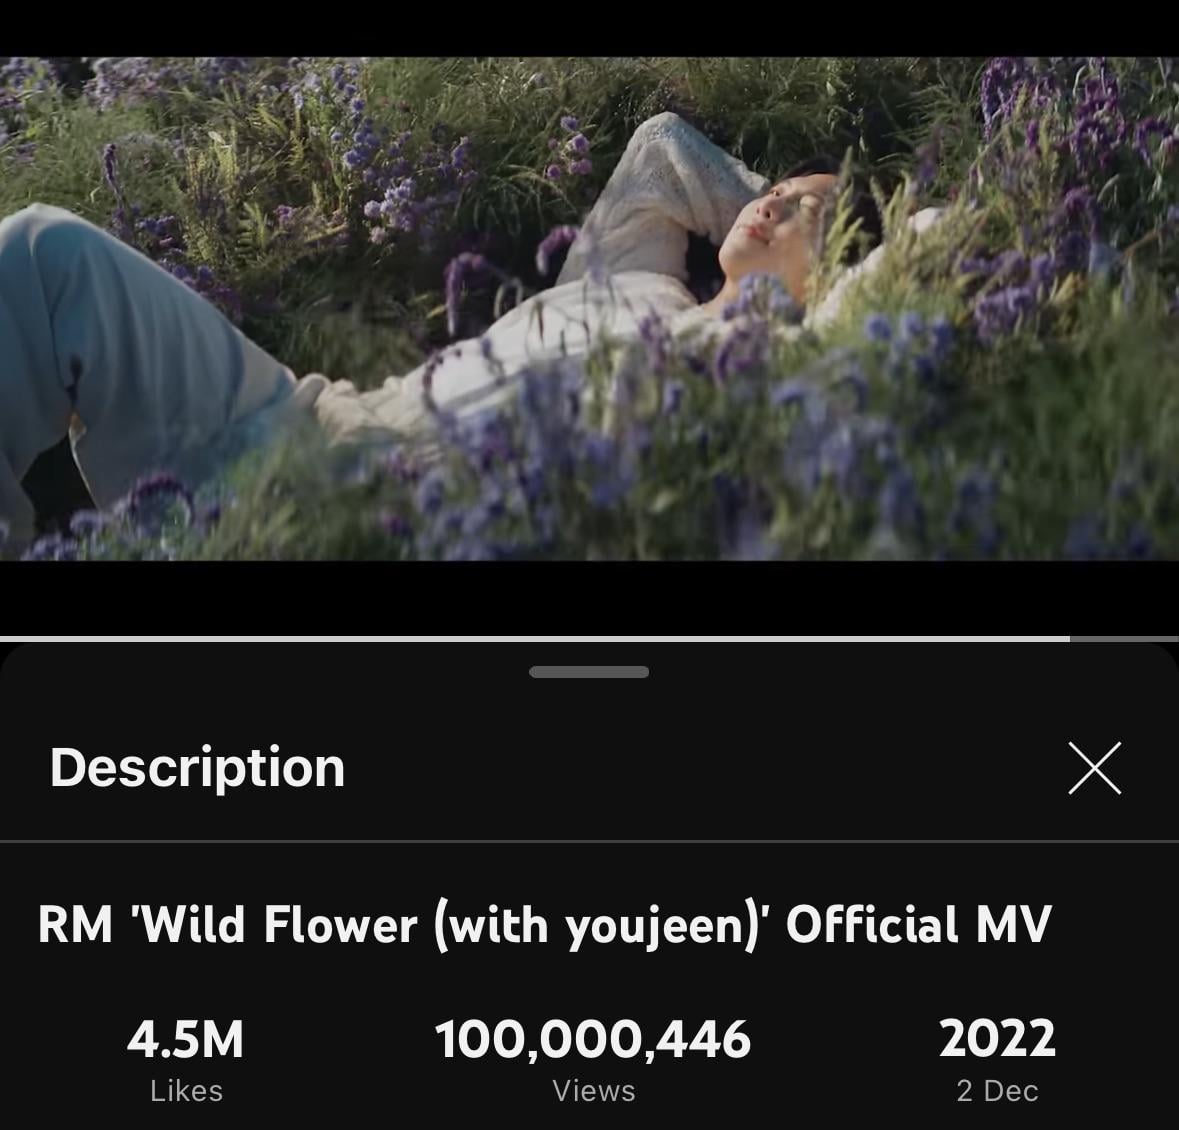 RM’s ‘Wild Flower (with youjeen)’ MV has surpassed 100 million views on YouTube! - 270424